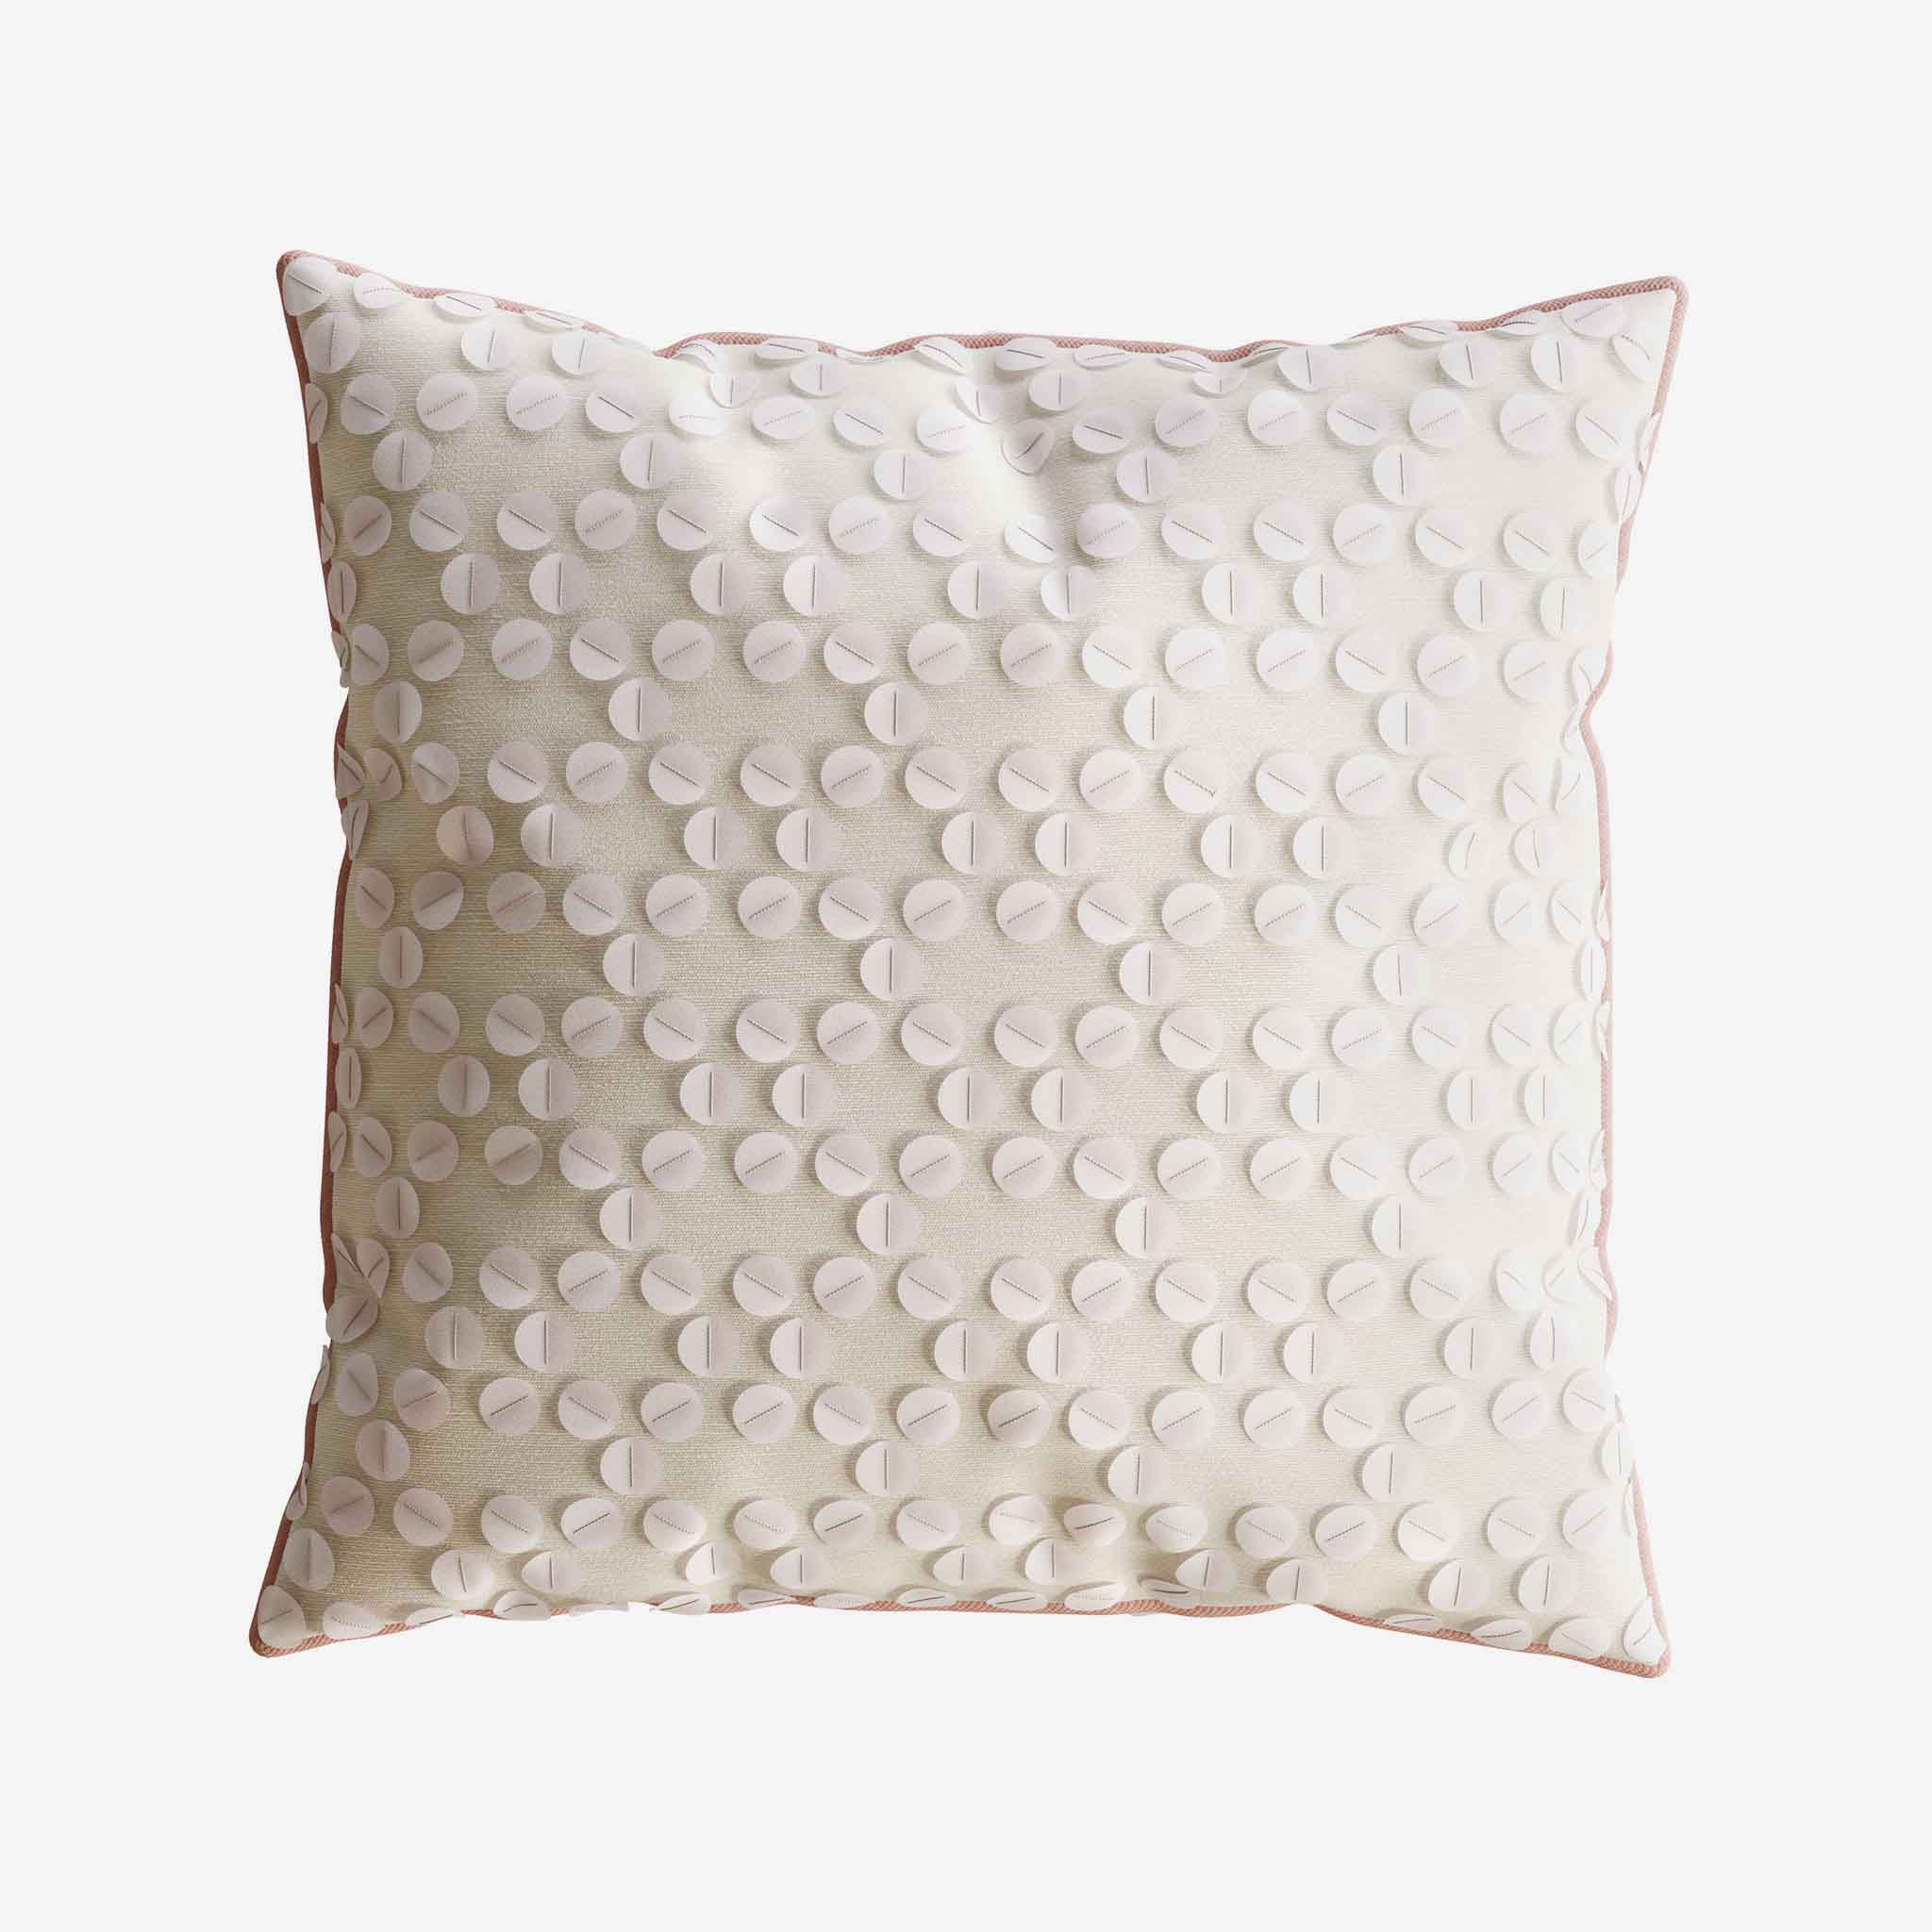 Luxury Cushion, Off-White Fabric, Geometric Pattern, Pink Lining, Bedroom, Living Room